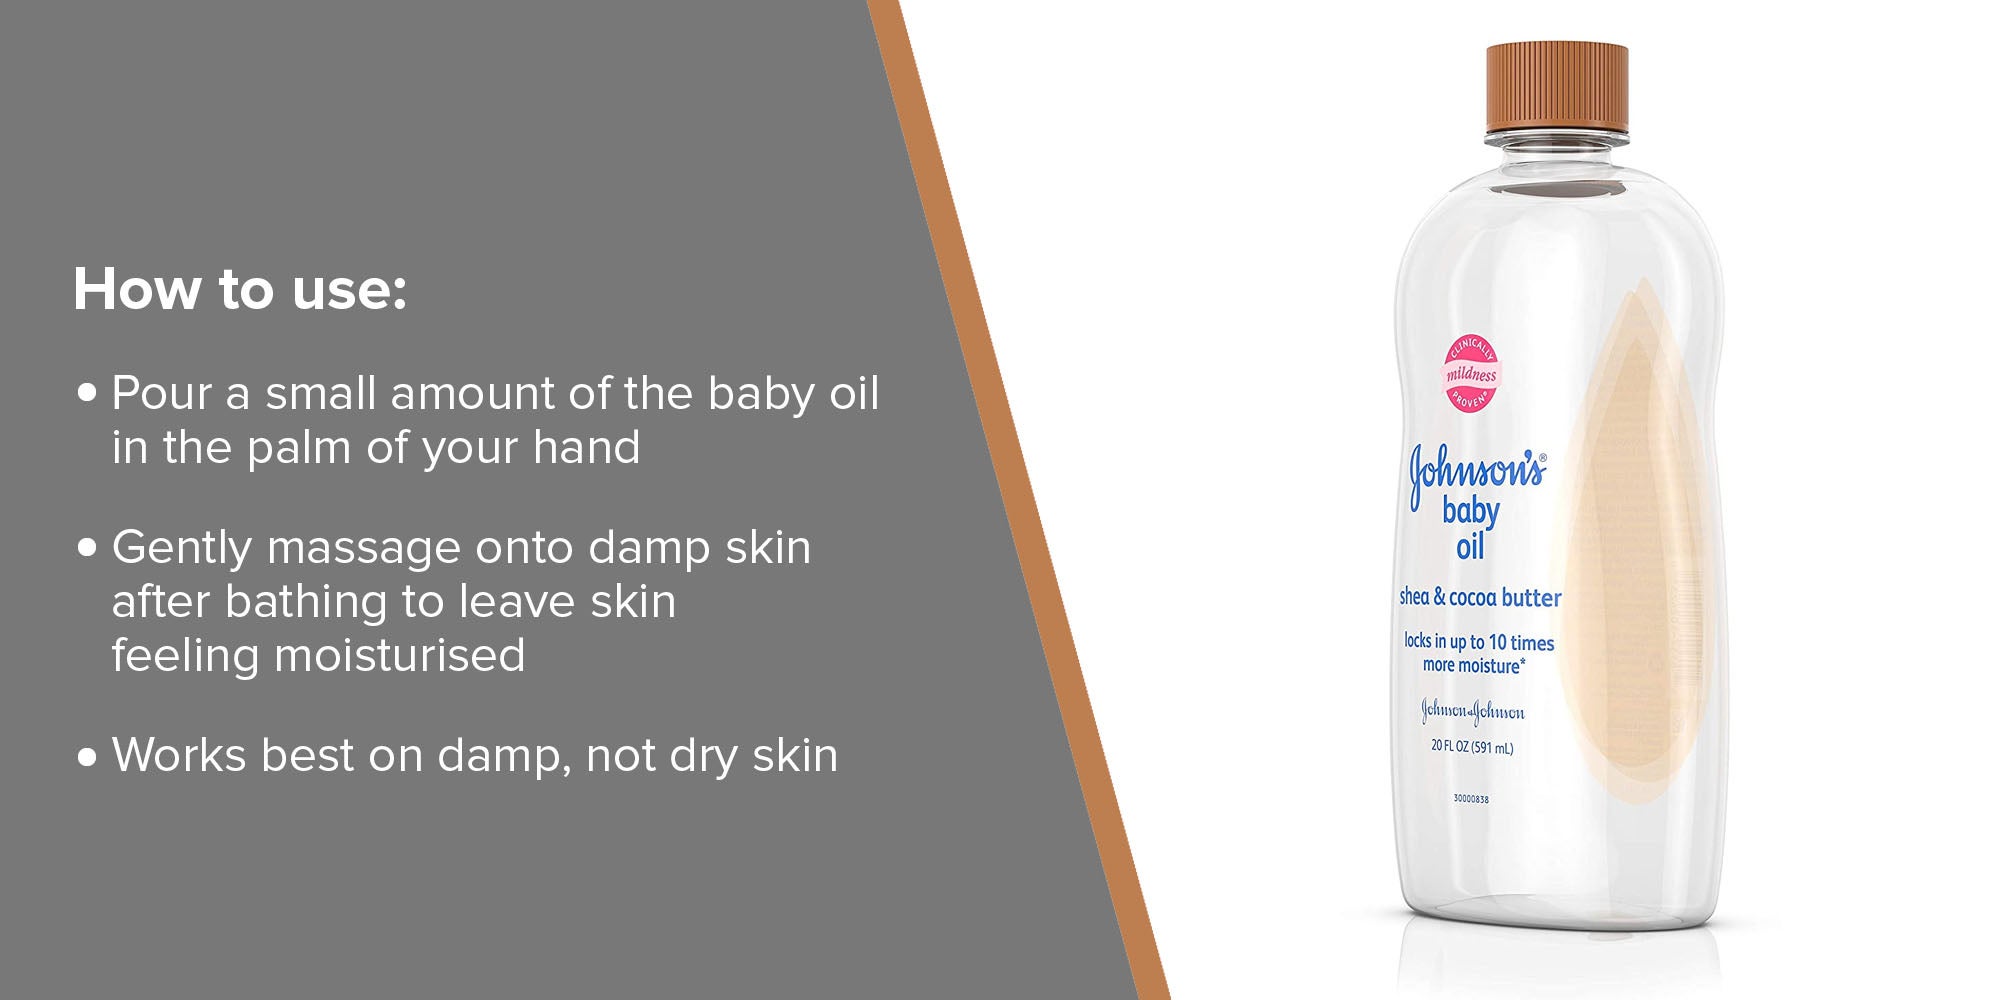 Johnson's Baby Oil with Shea & Cocoa Butter, 20 fl. oz 